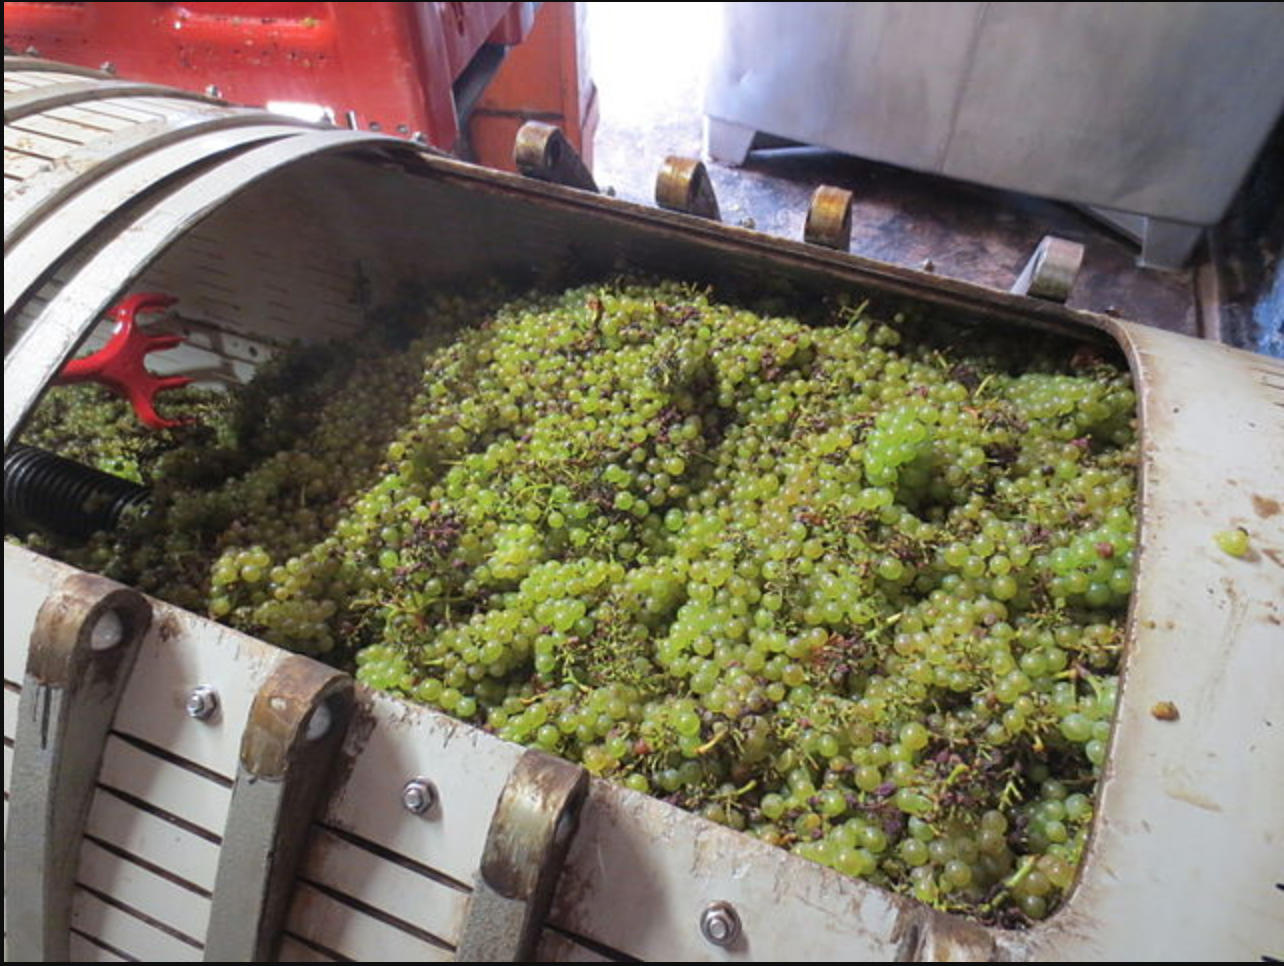 Chardonnay grapes ready to be pressed in Jura, France.